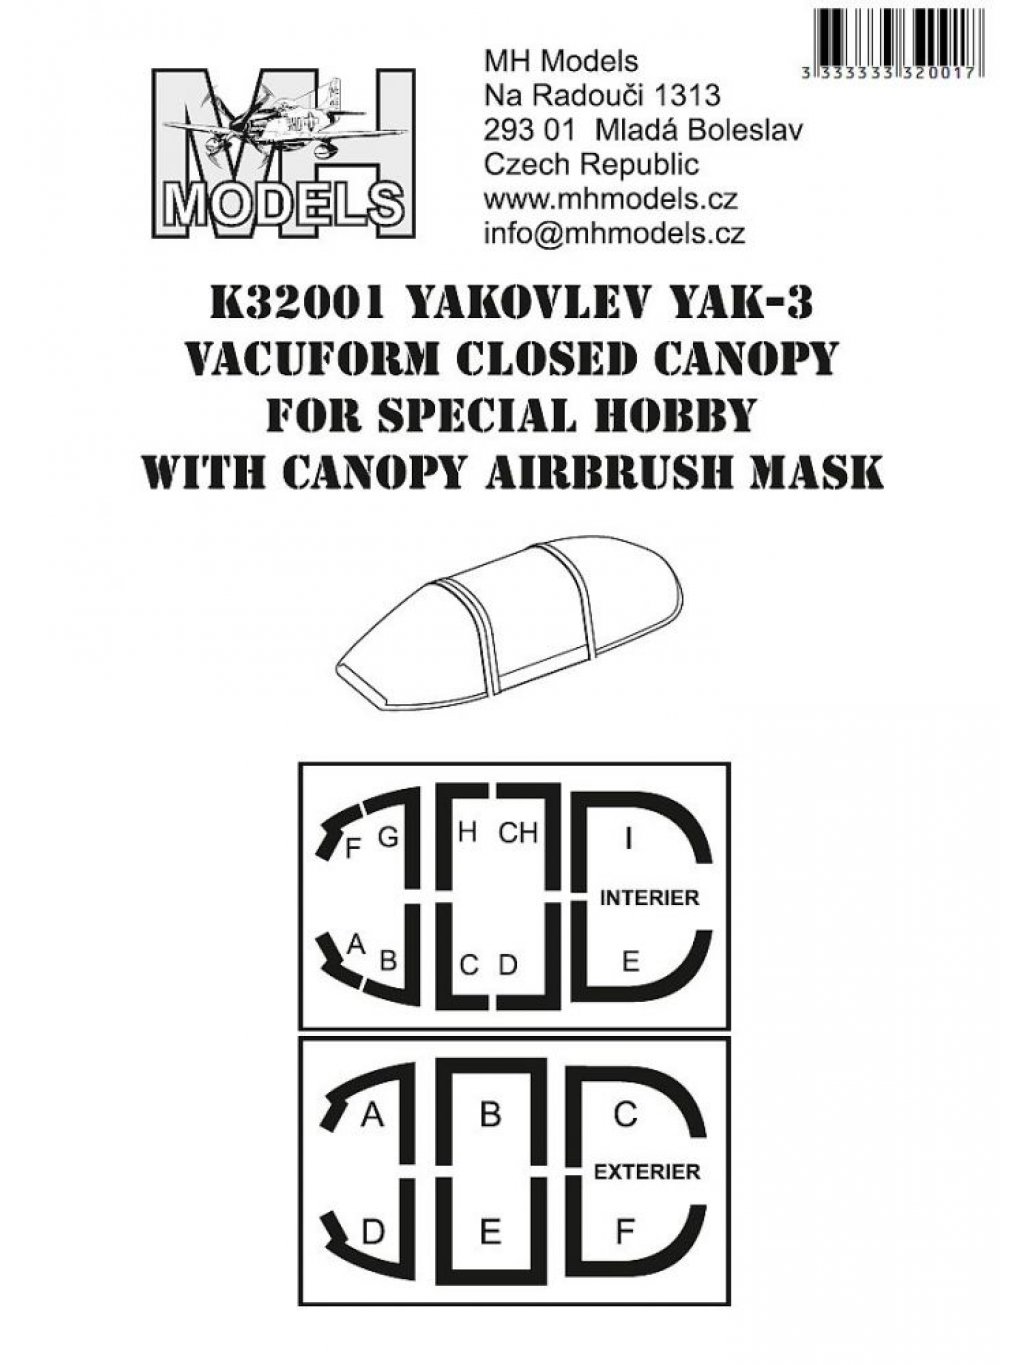 Yakovlev Yak-3 vacuform closed canopy for Special Hobby with canopy airbrush mask